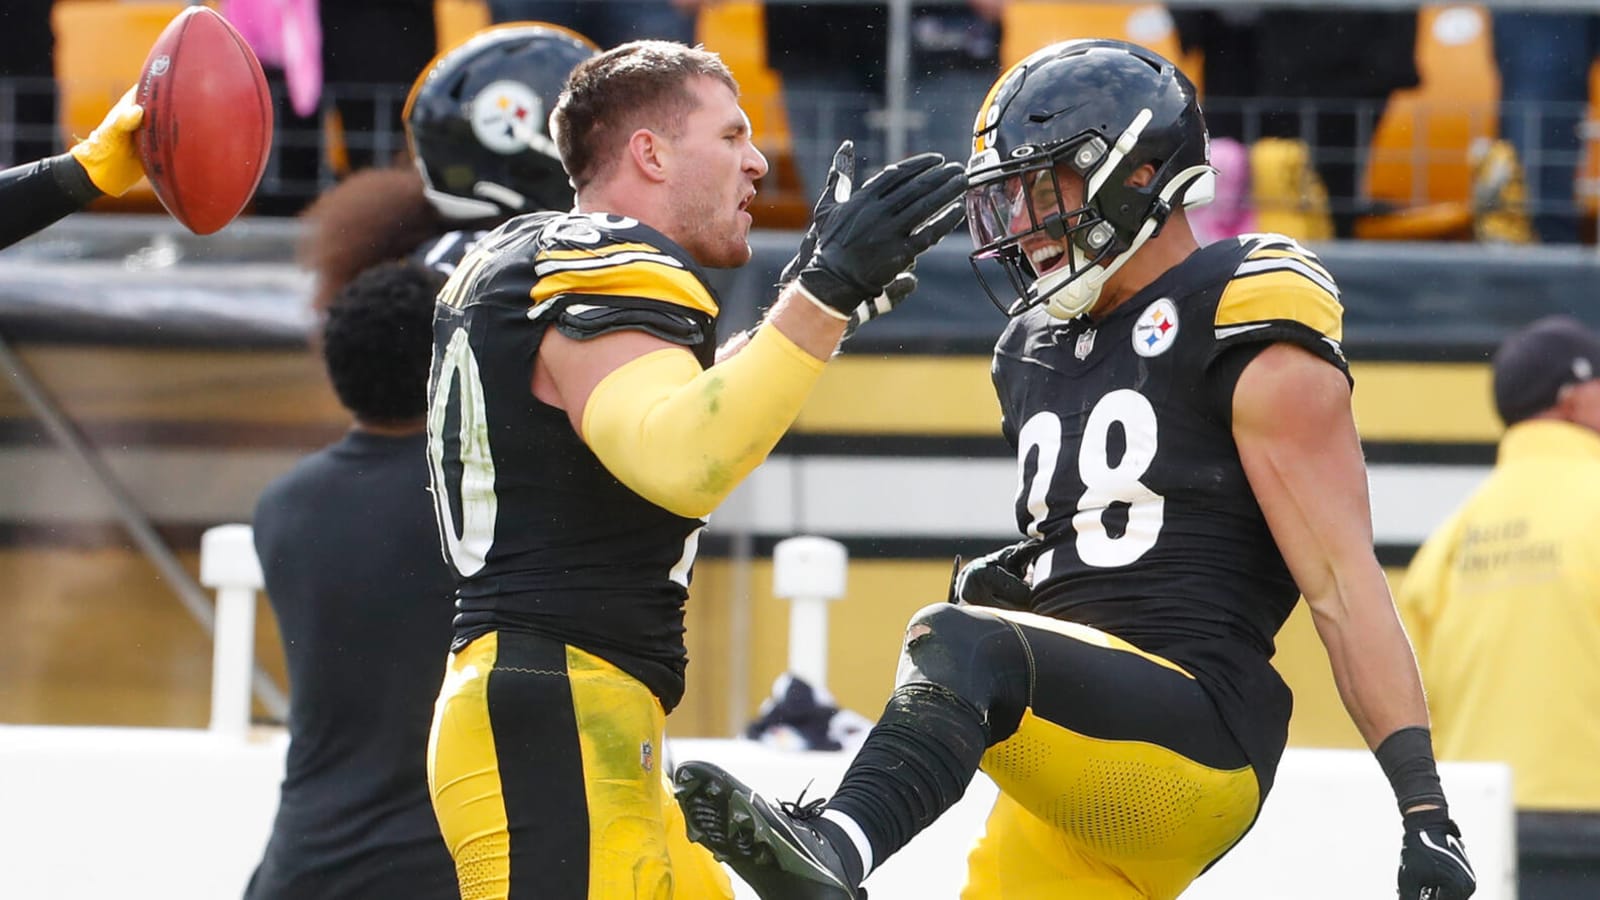 Watch: Killebrew’s punt block results in safety for Steelers